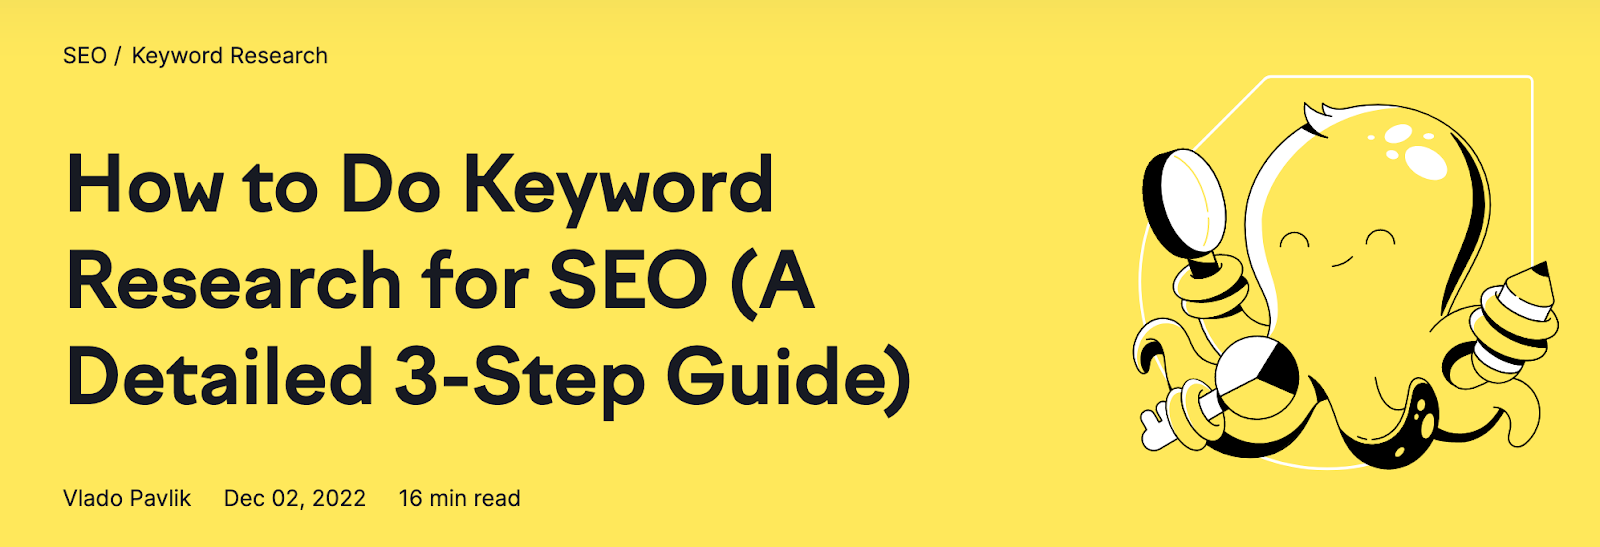 Semruh blog title "How to do keyword research for SEO (a detailed 3-step guide)